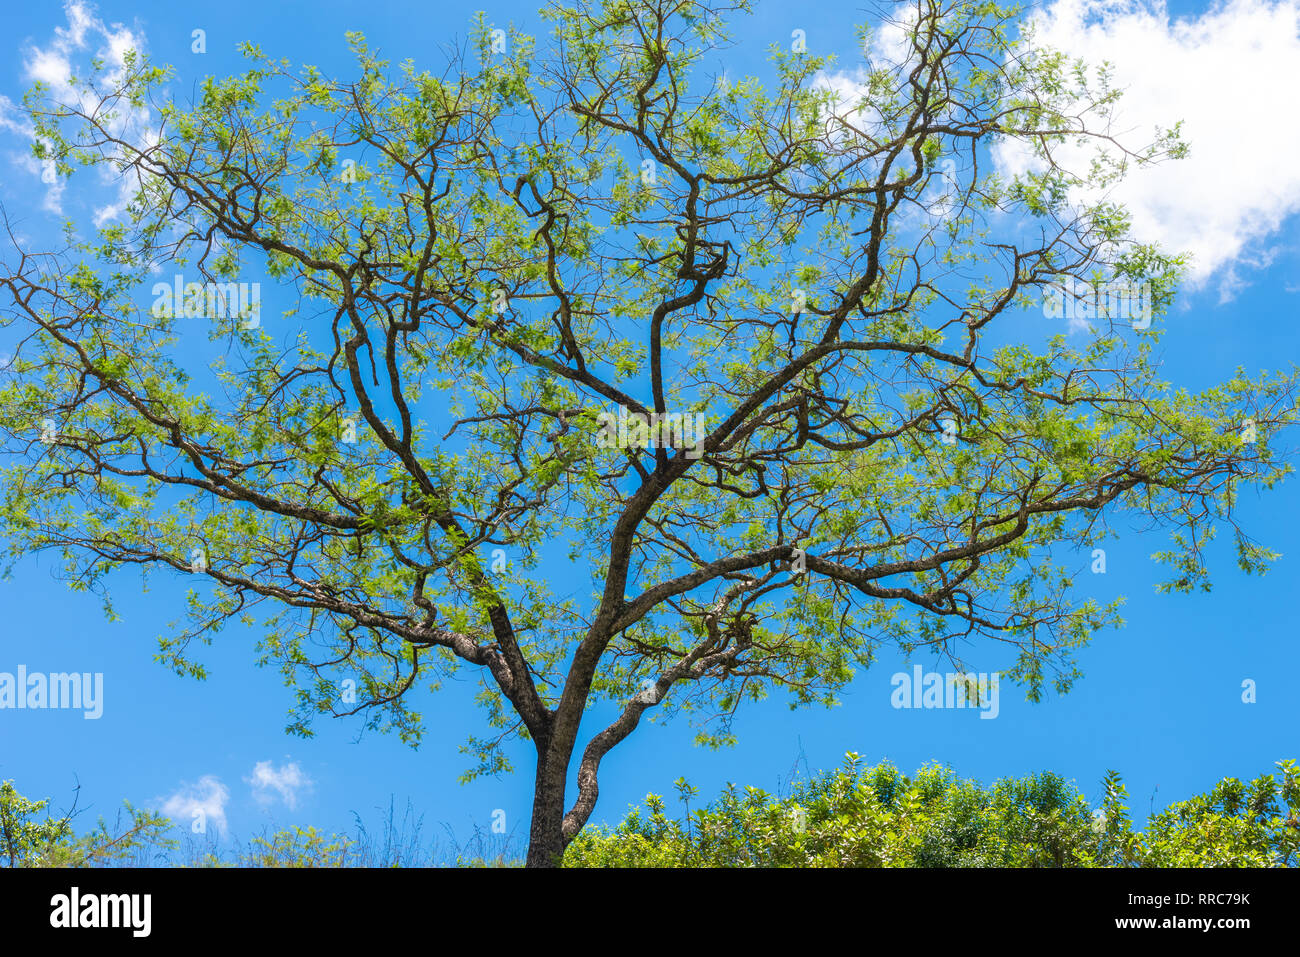 An African Acacia tree against a vibrant blue sky in Kwa-zulu Natal, South Africa. Stock Photo